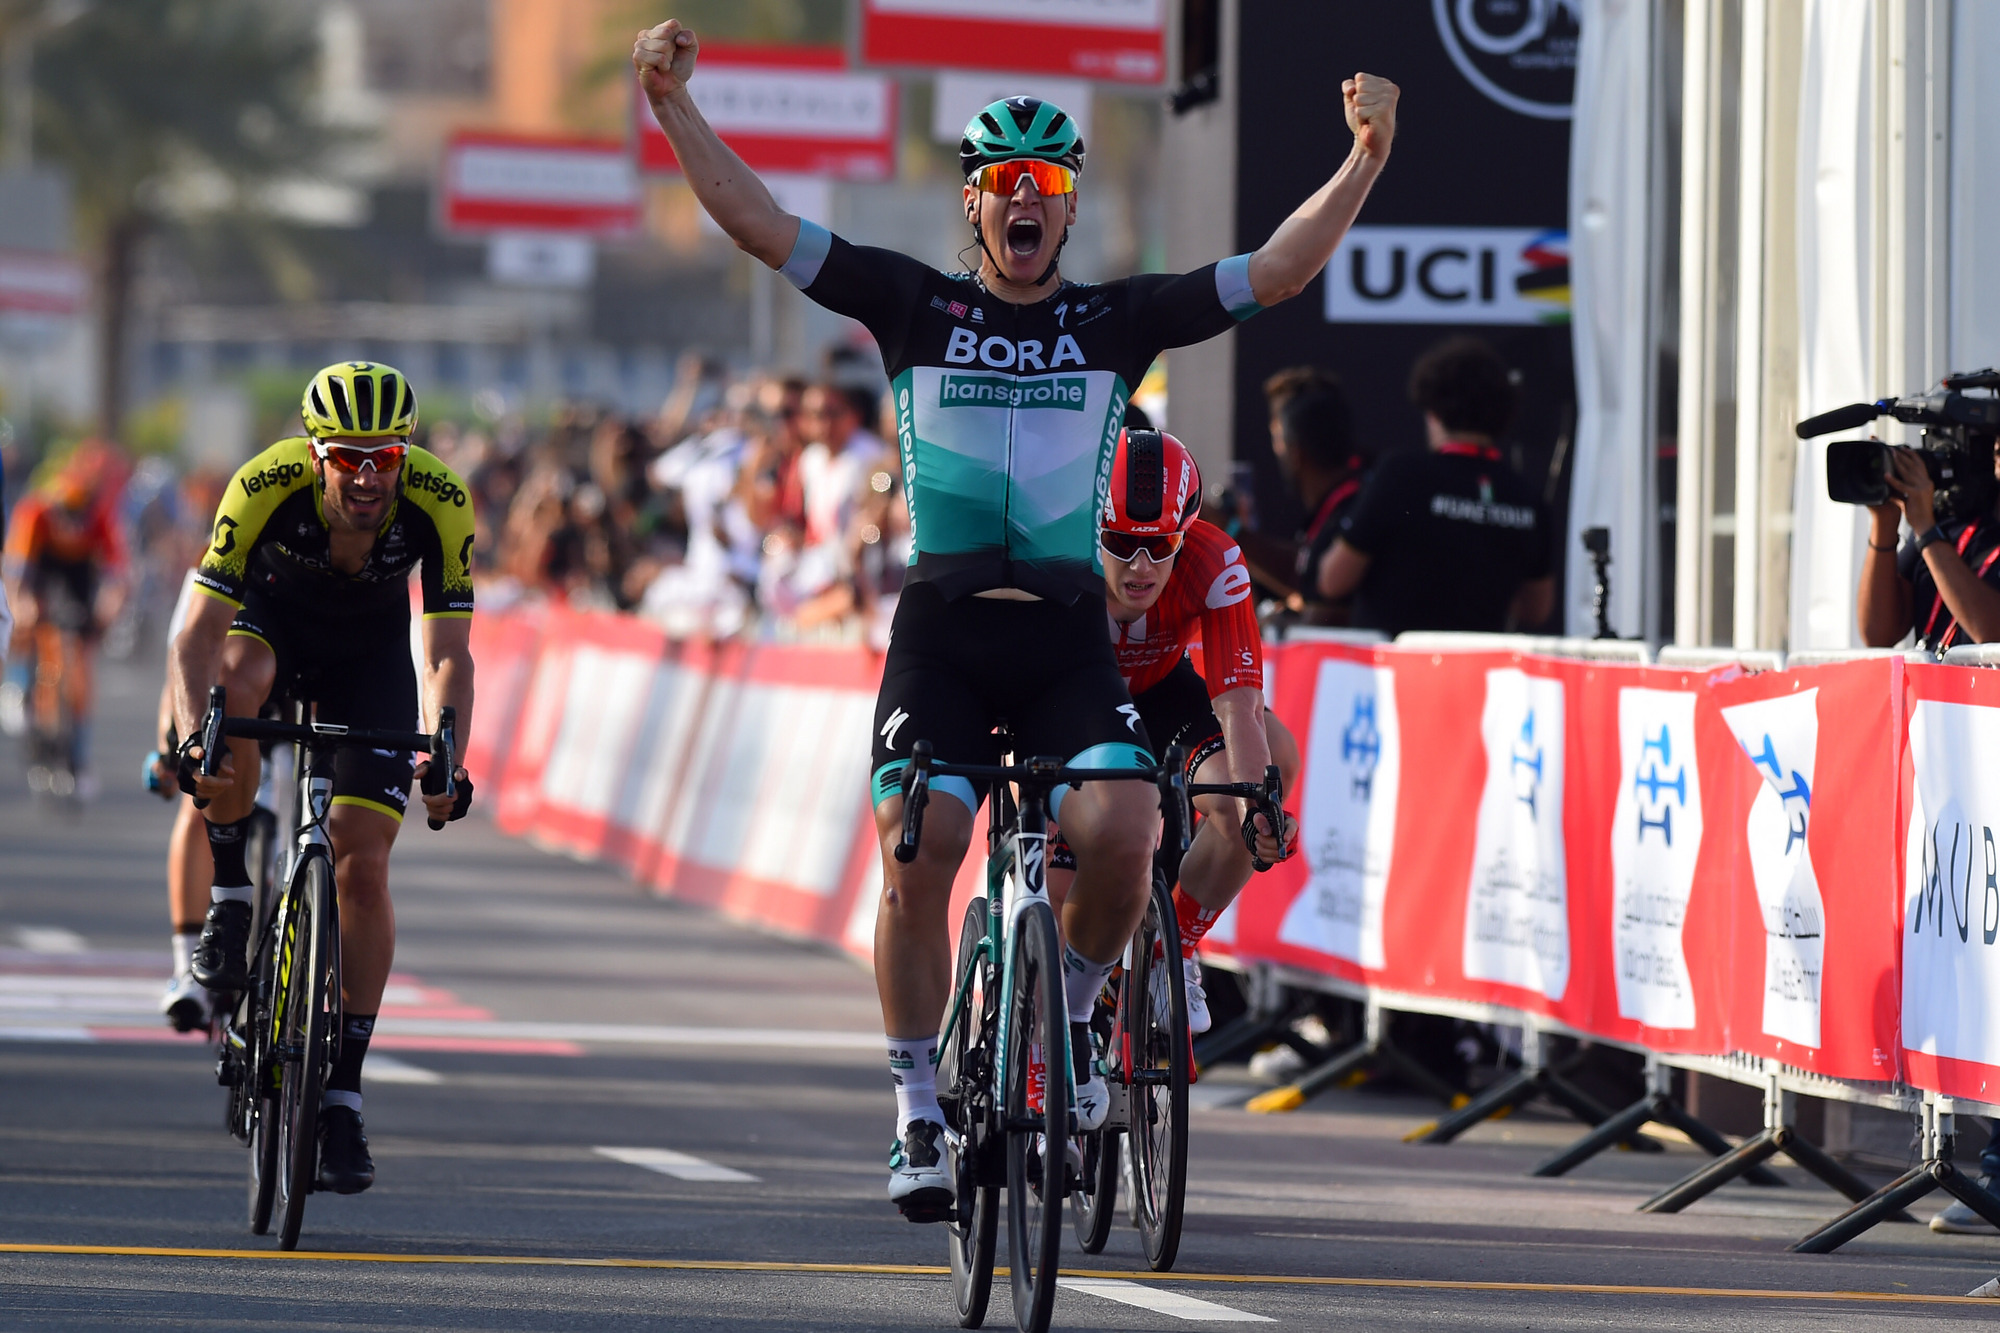 Pascal Ackermann (Bora-Hansgrohe) wins stage 1 at the UAE Tour